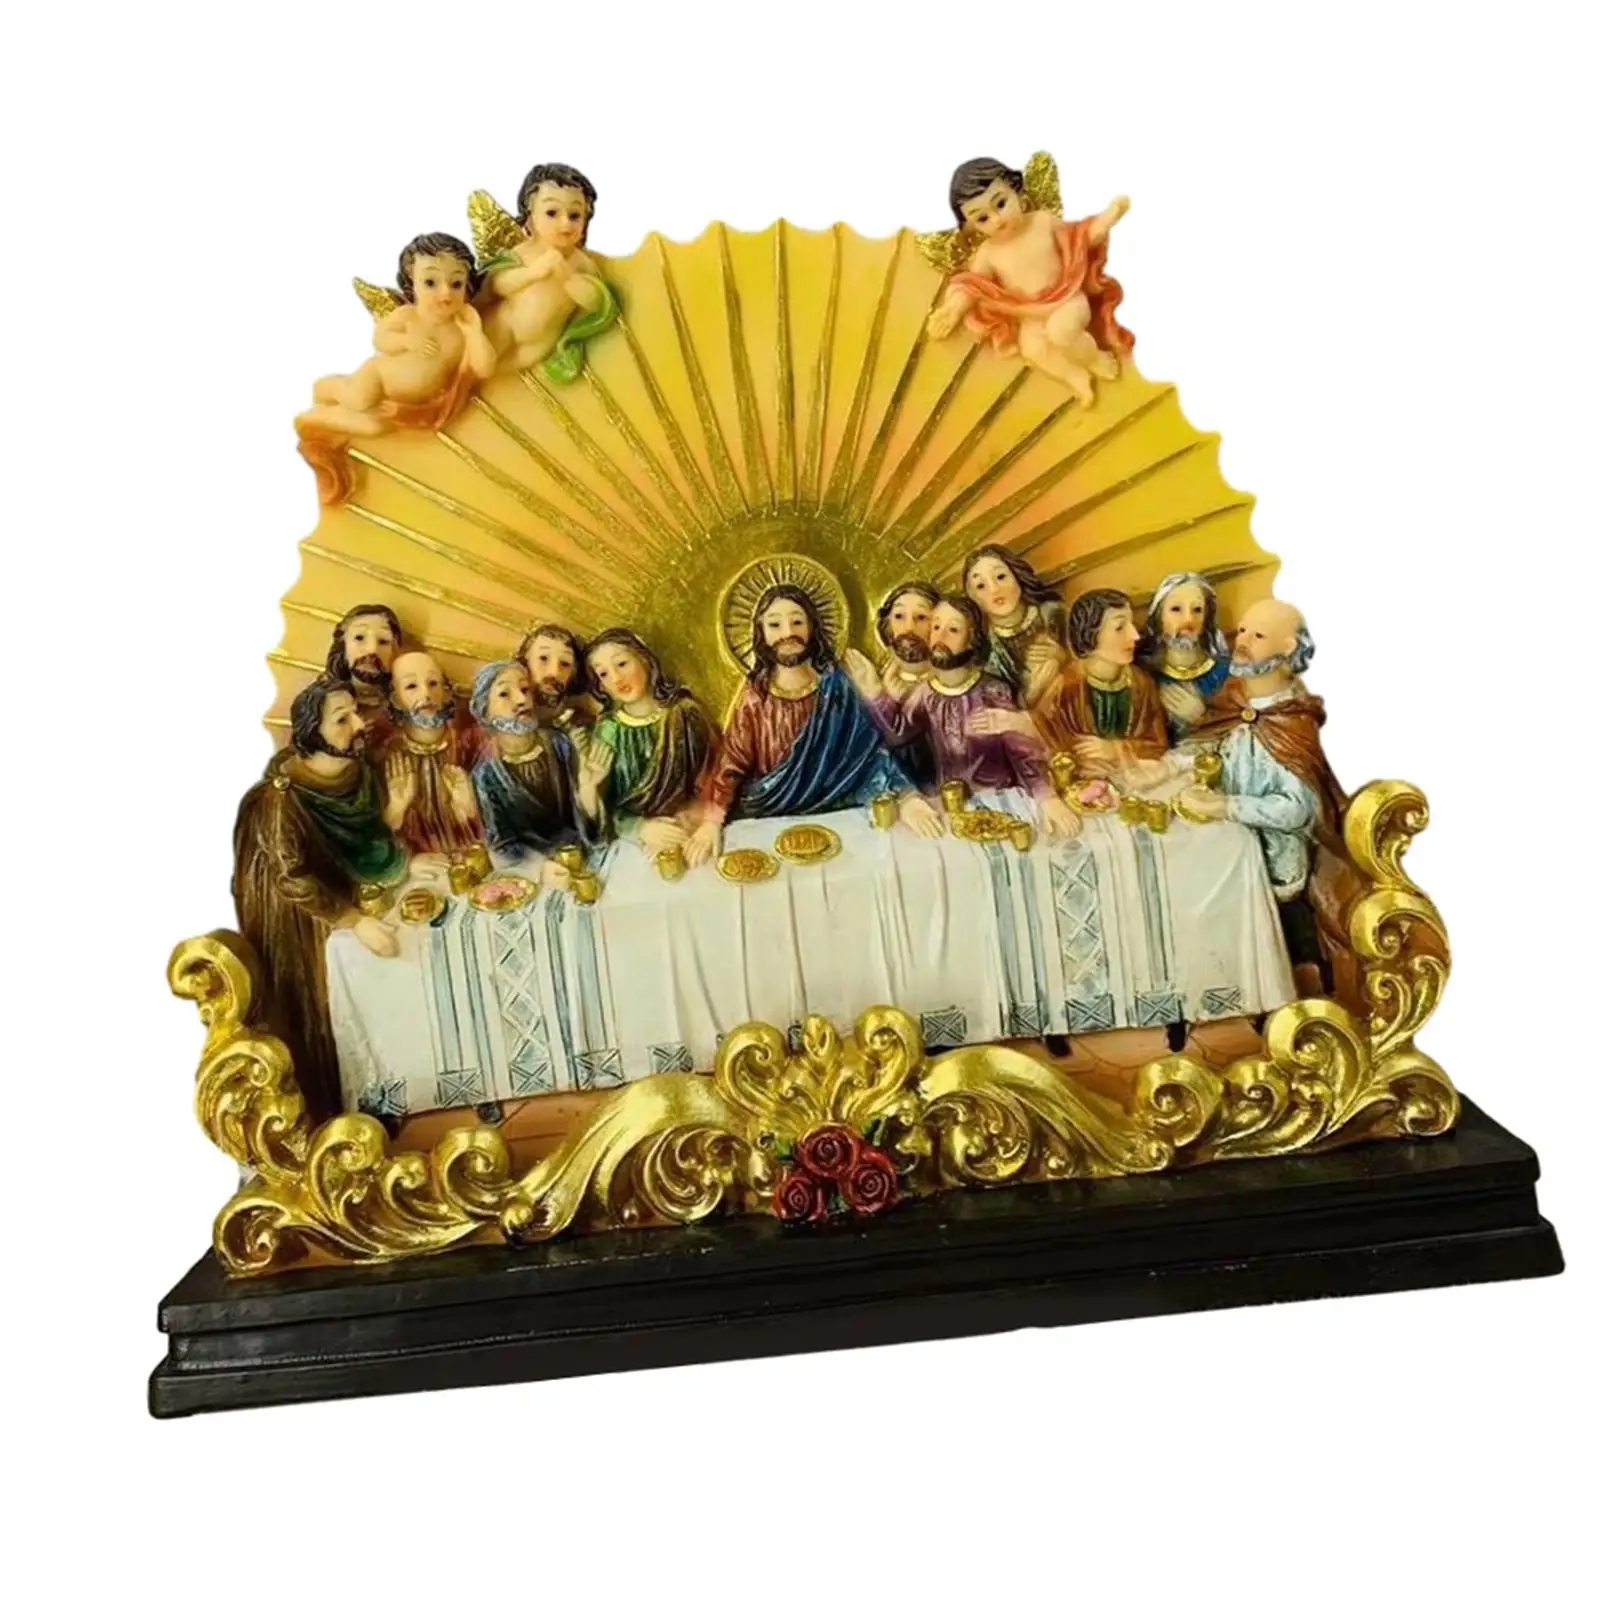 Resin Last Supper Statue Sculpture Decorative Crafts Tabletop Figurine for Office Home Living Room Ornaments Collection Gifts